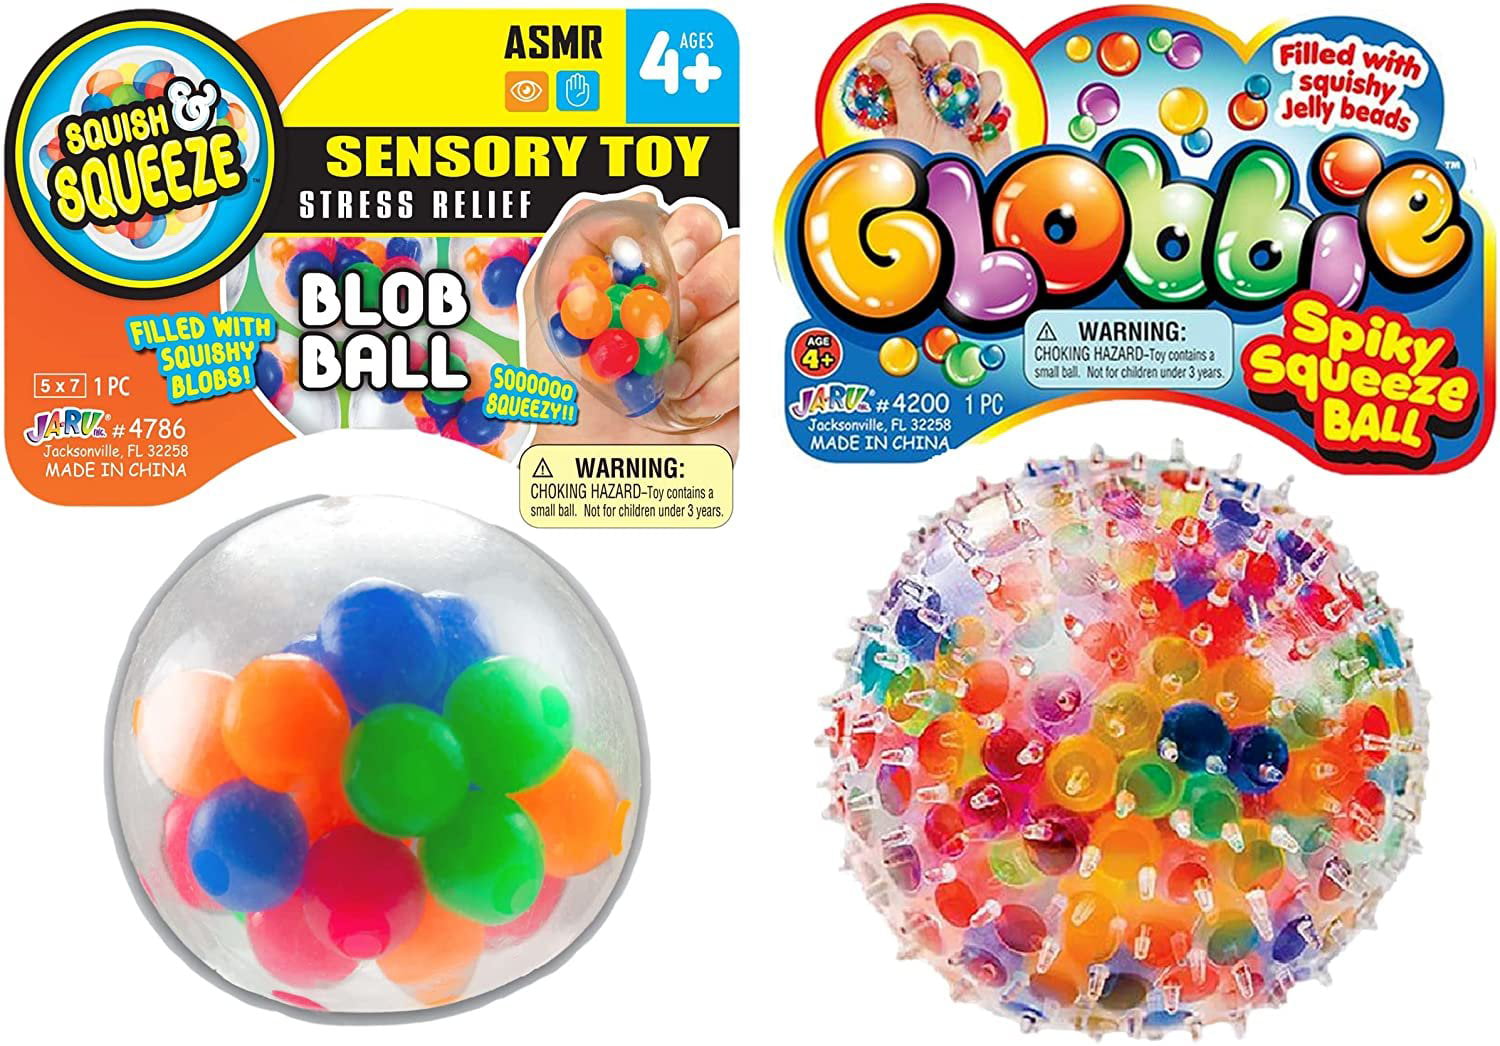 Globbie Sensory Squeeze Toy Spiky Ball Filled With Jelly Beads New in Package 